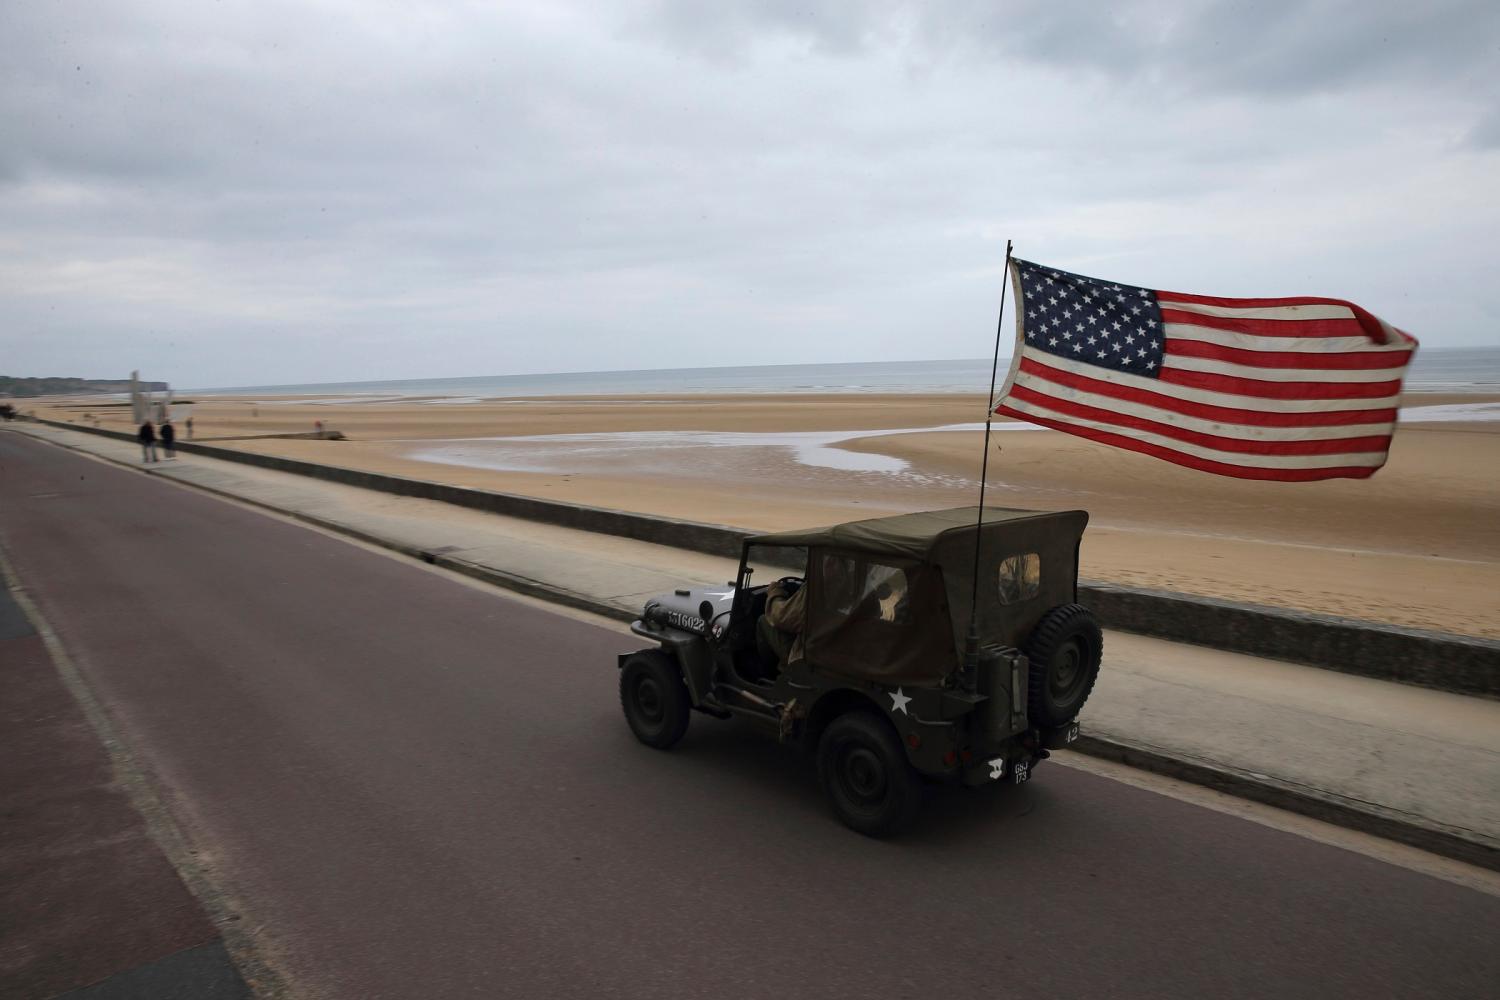 An American flag waves from the back of a jeep as a history enthusiast, drives on the road near Omaha beach in Saint-Laurent-sur-Mer, on the Normandy coast June 2, 2014. World leaders will attend ceremonies in Normandy June 6, 2014 marking the 70th anniversary of the World War Two allied beach landings on D-Day. REUTERS/Pascal Rossignol (FRANCE - Tags: CONFLICT ANNIVERSARY) - PM1EA621BKJ01